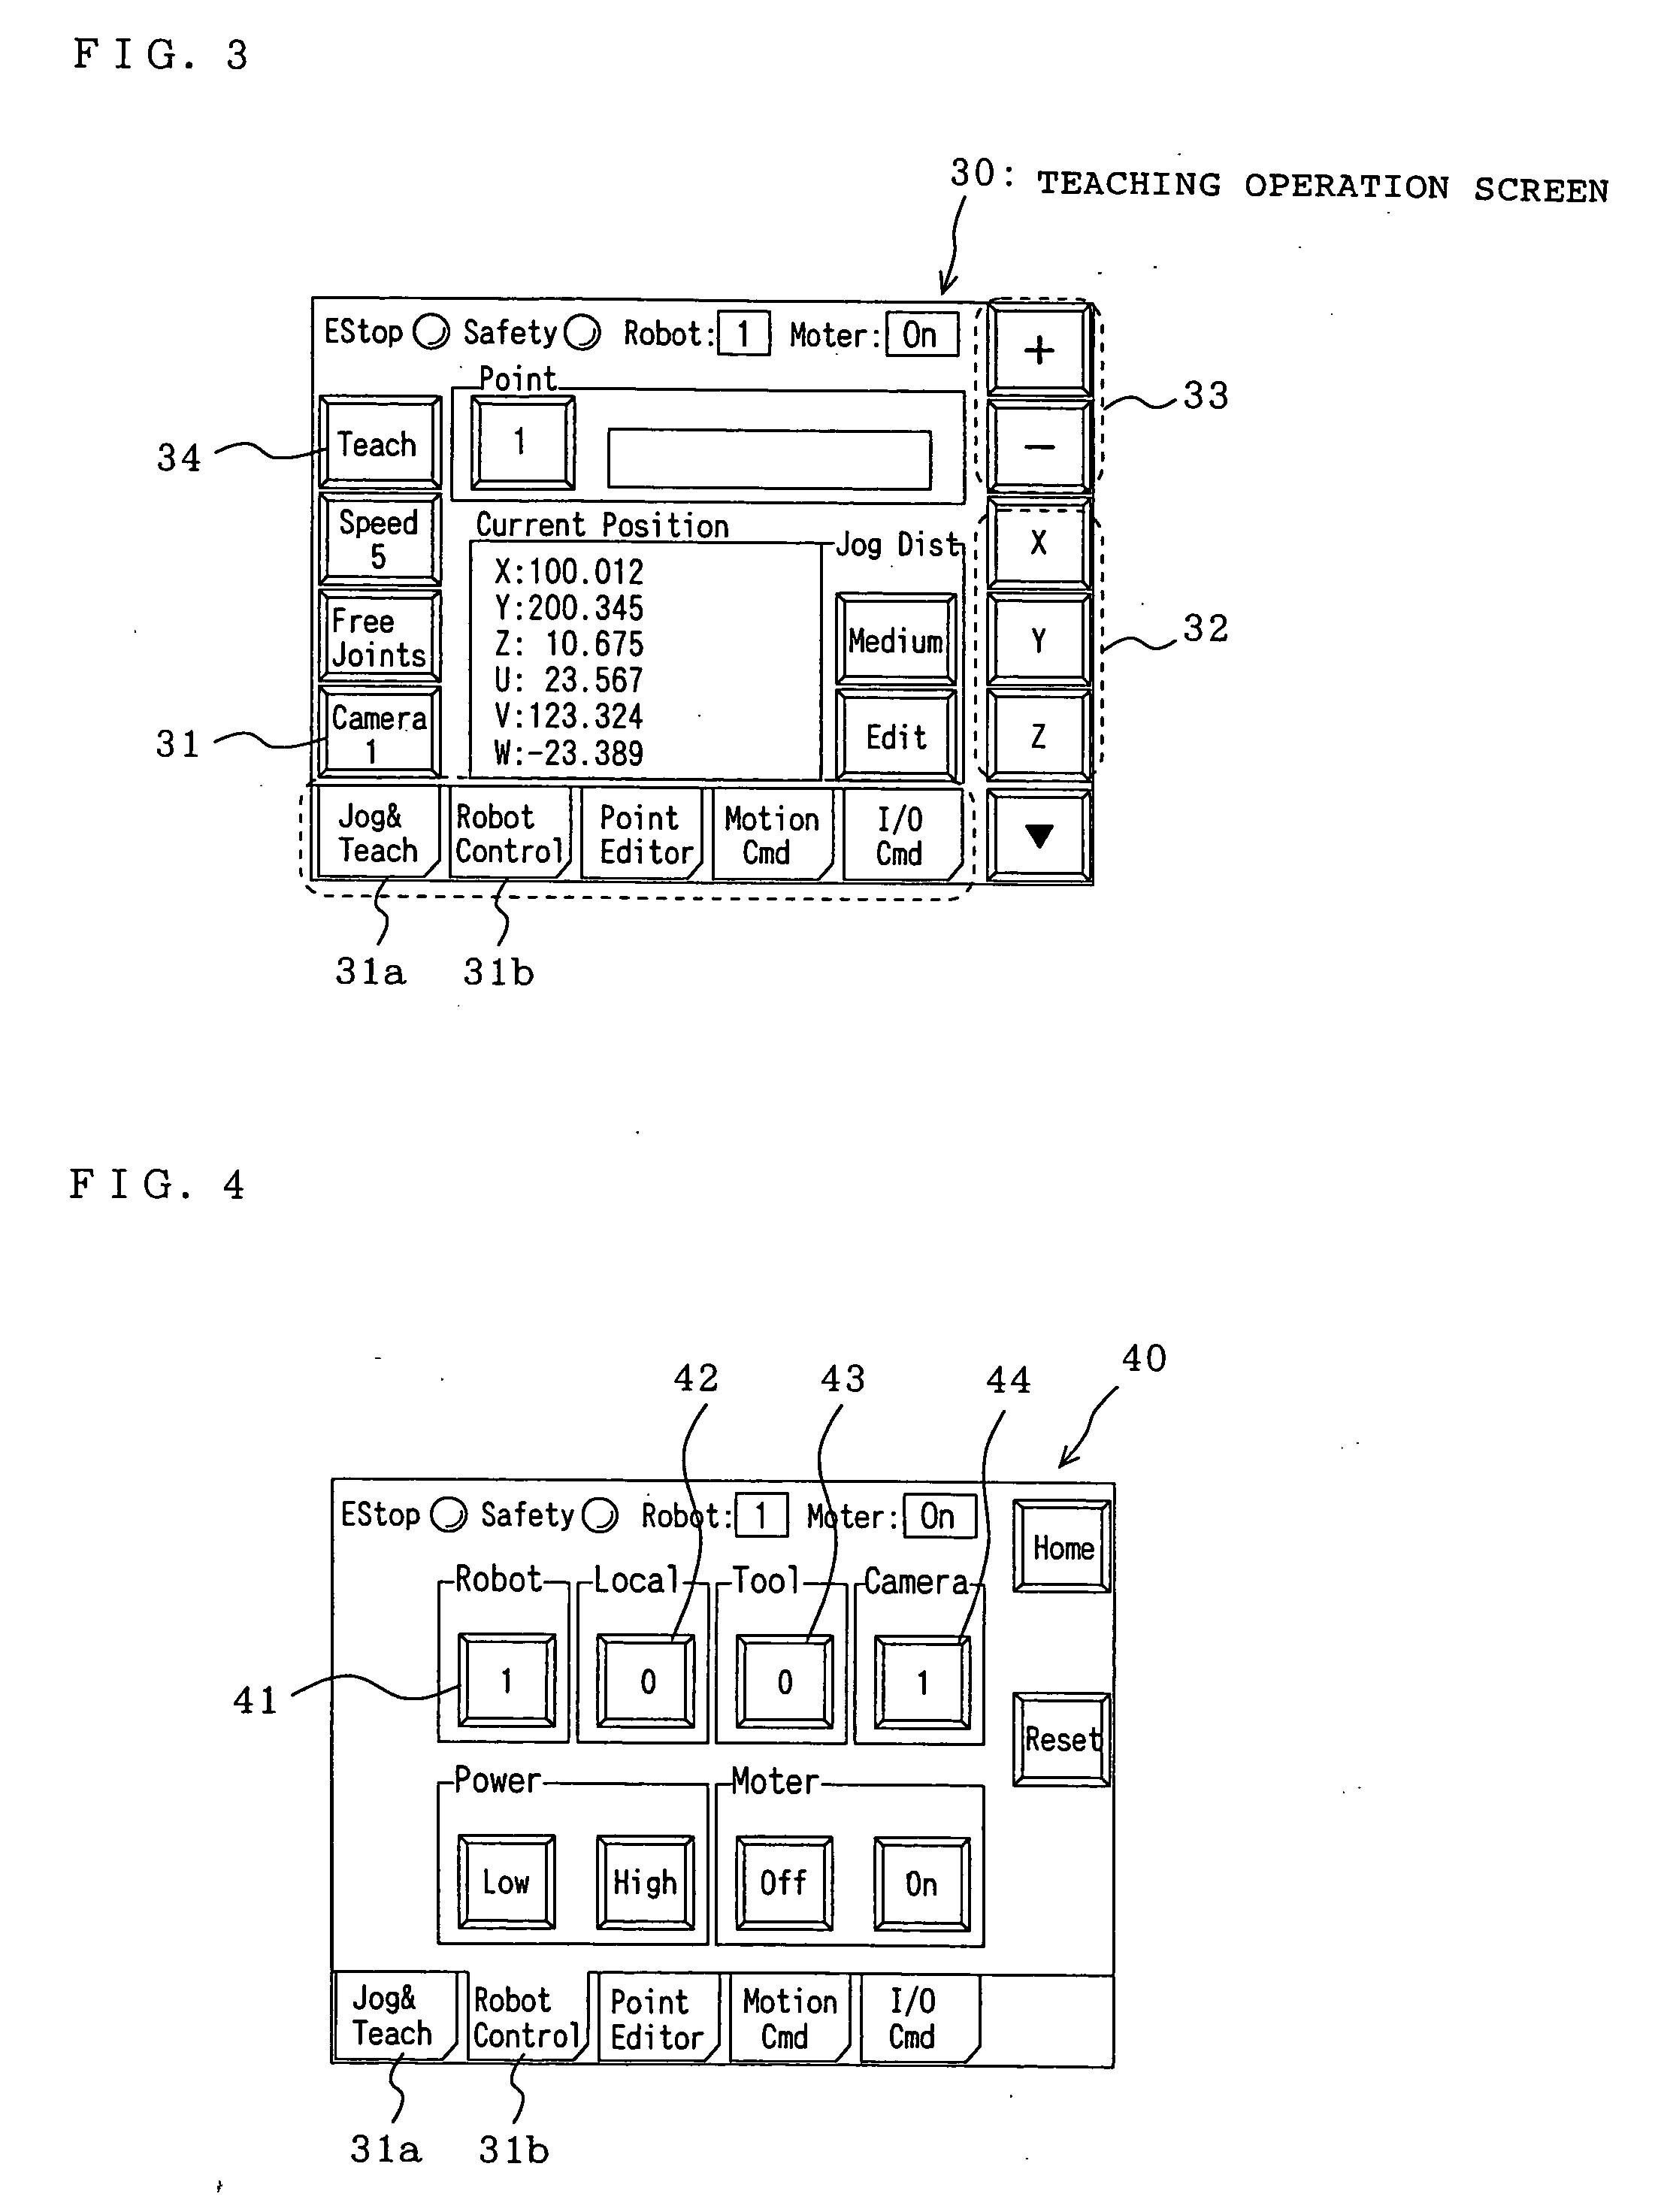 Motion control apparatus for teaching robot position, robot-position teaching apparatus, motion control method for teaching robot position, robot-position teaching method, and motion control program for teaching robot-position